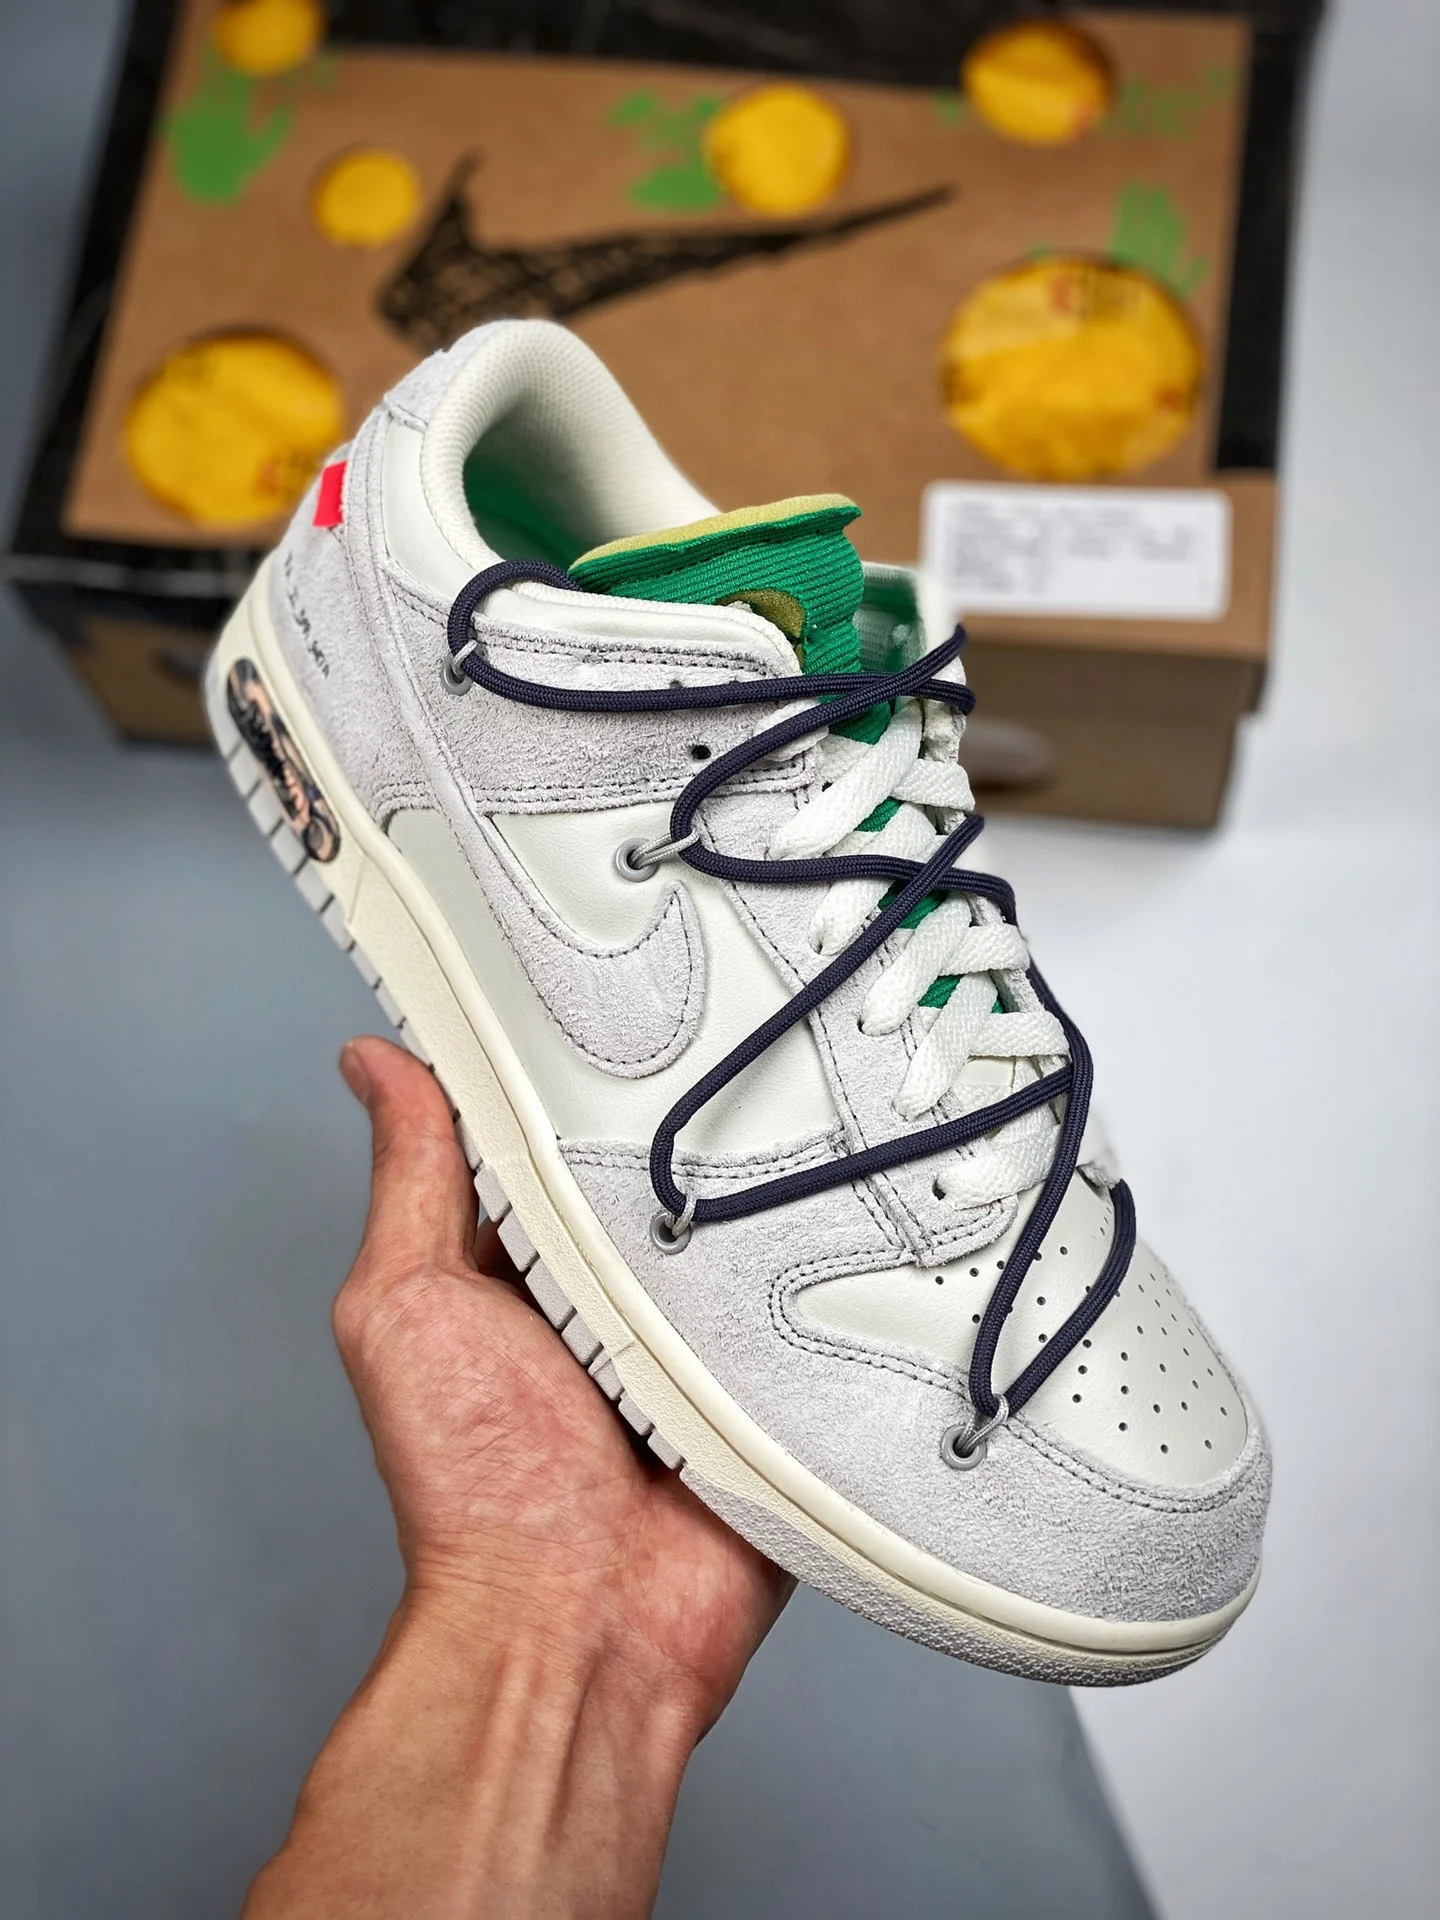 Off-White x Nike Dunk Low 20 of 50 Grey Sail Green For Sale